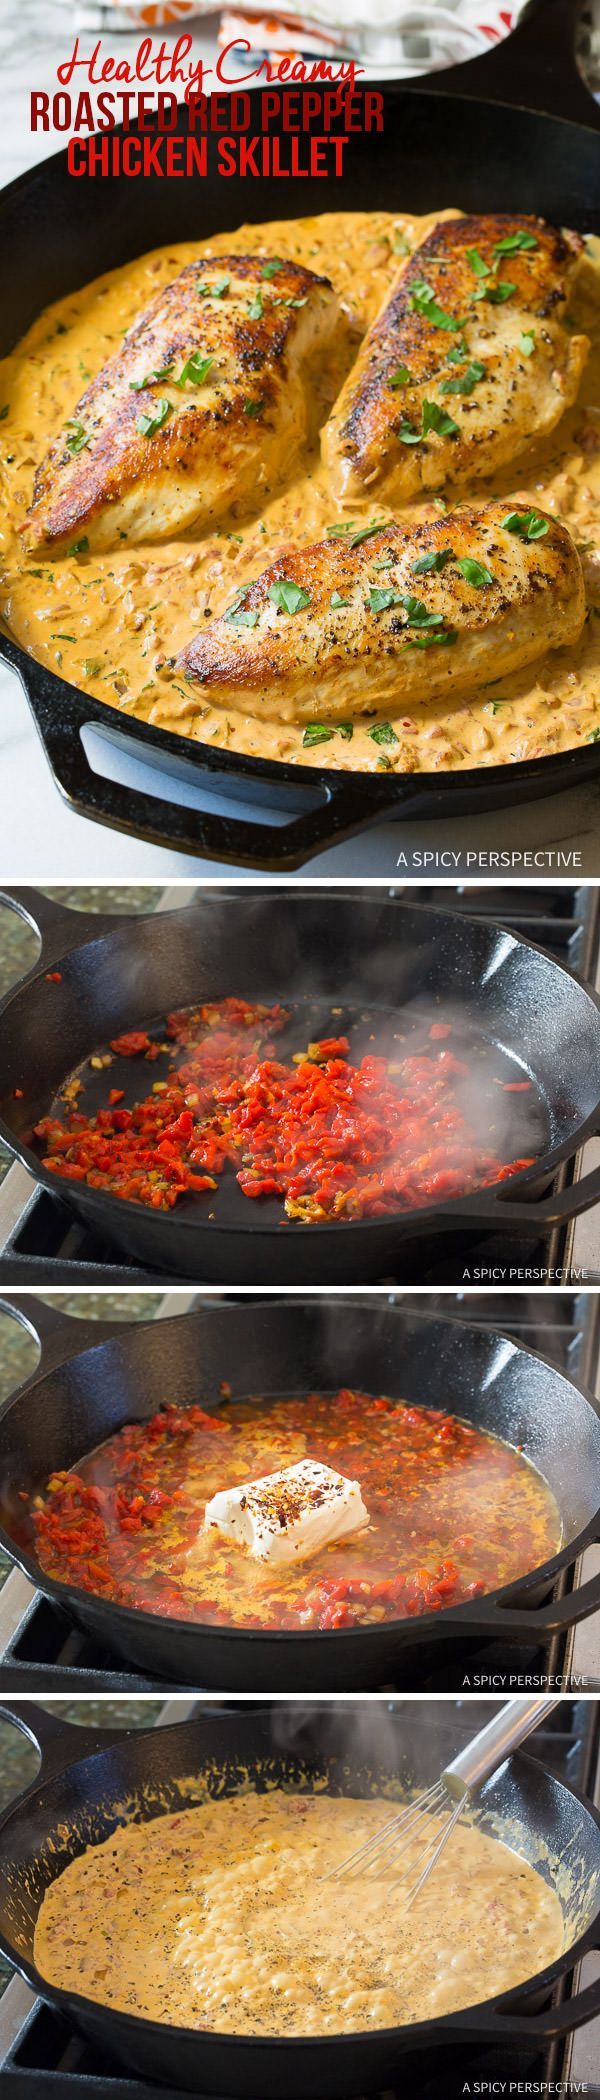 Easy to Make Healthy & Creamy Roasted Red Pepper Chicken Skillet Recipe | ASpicyPerspective…